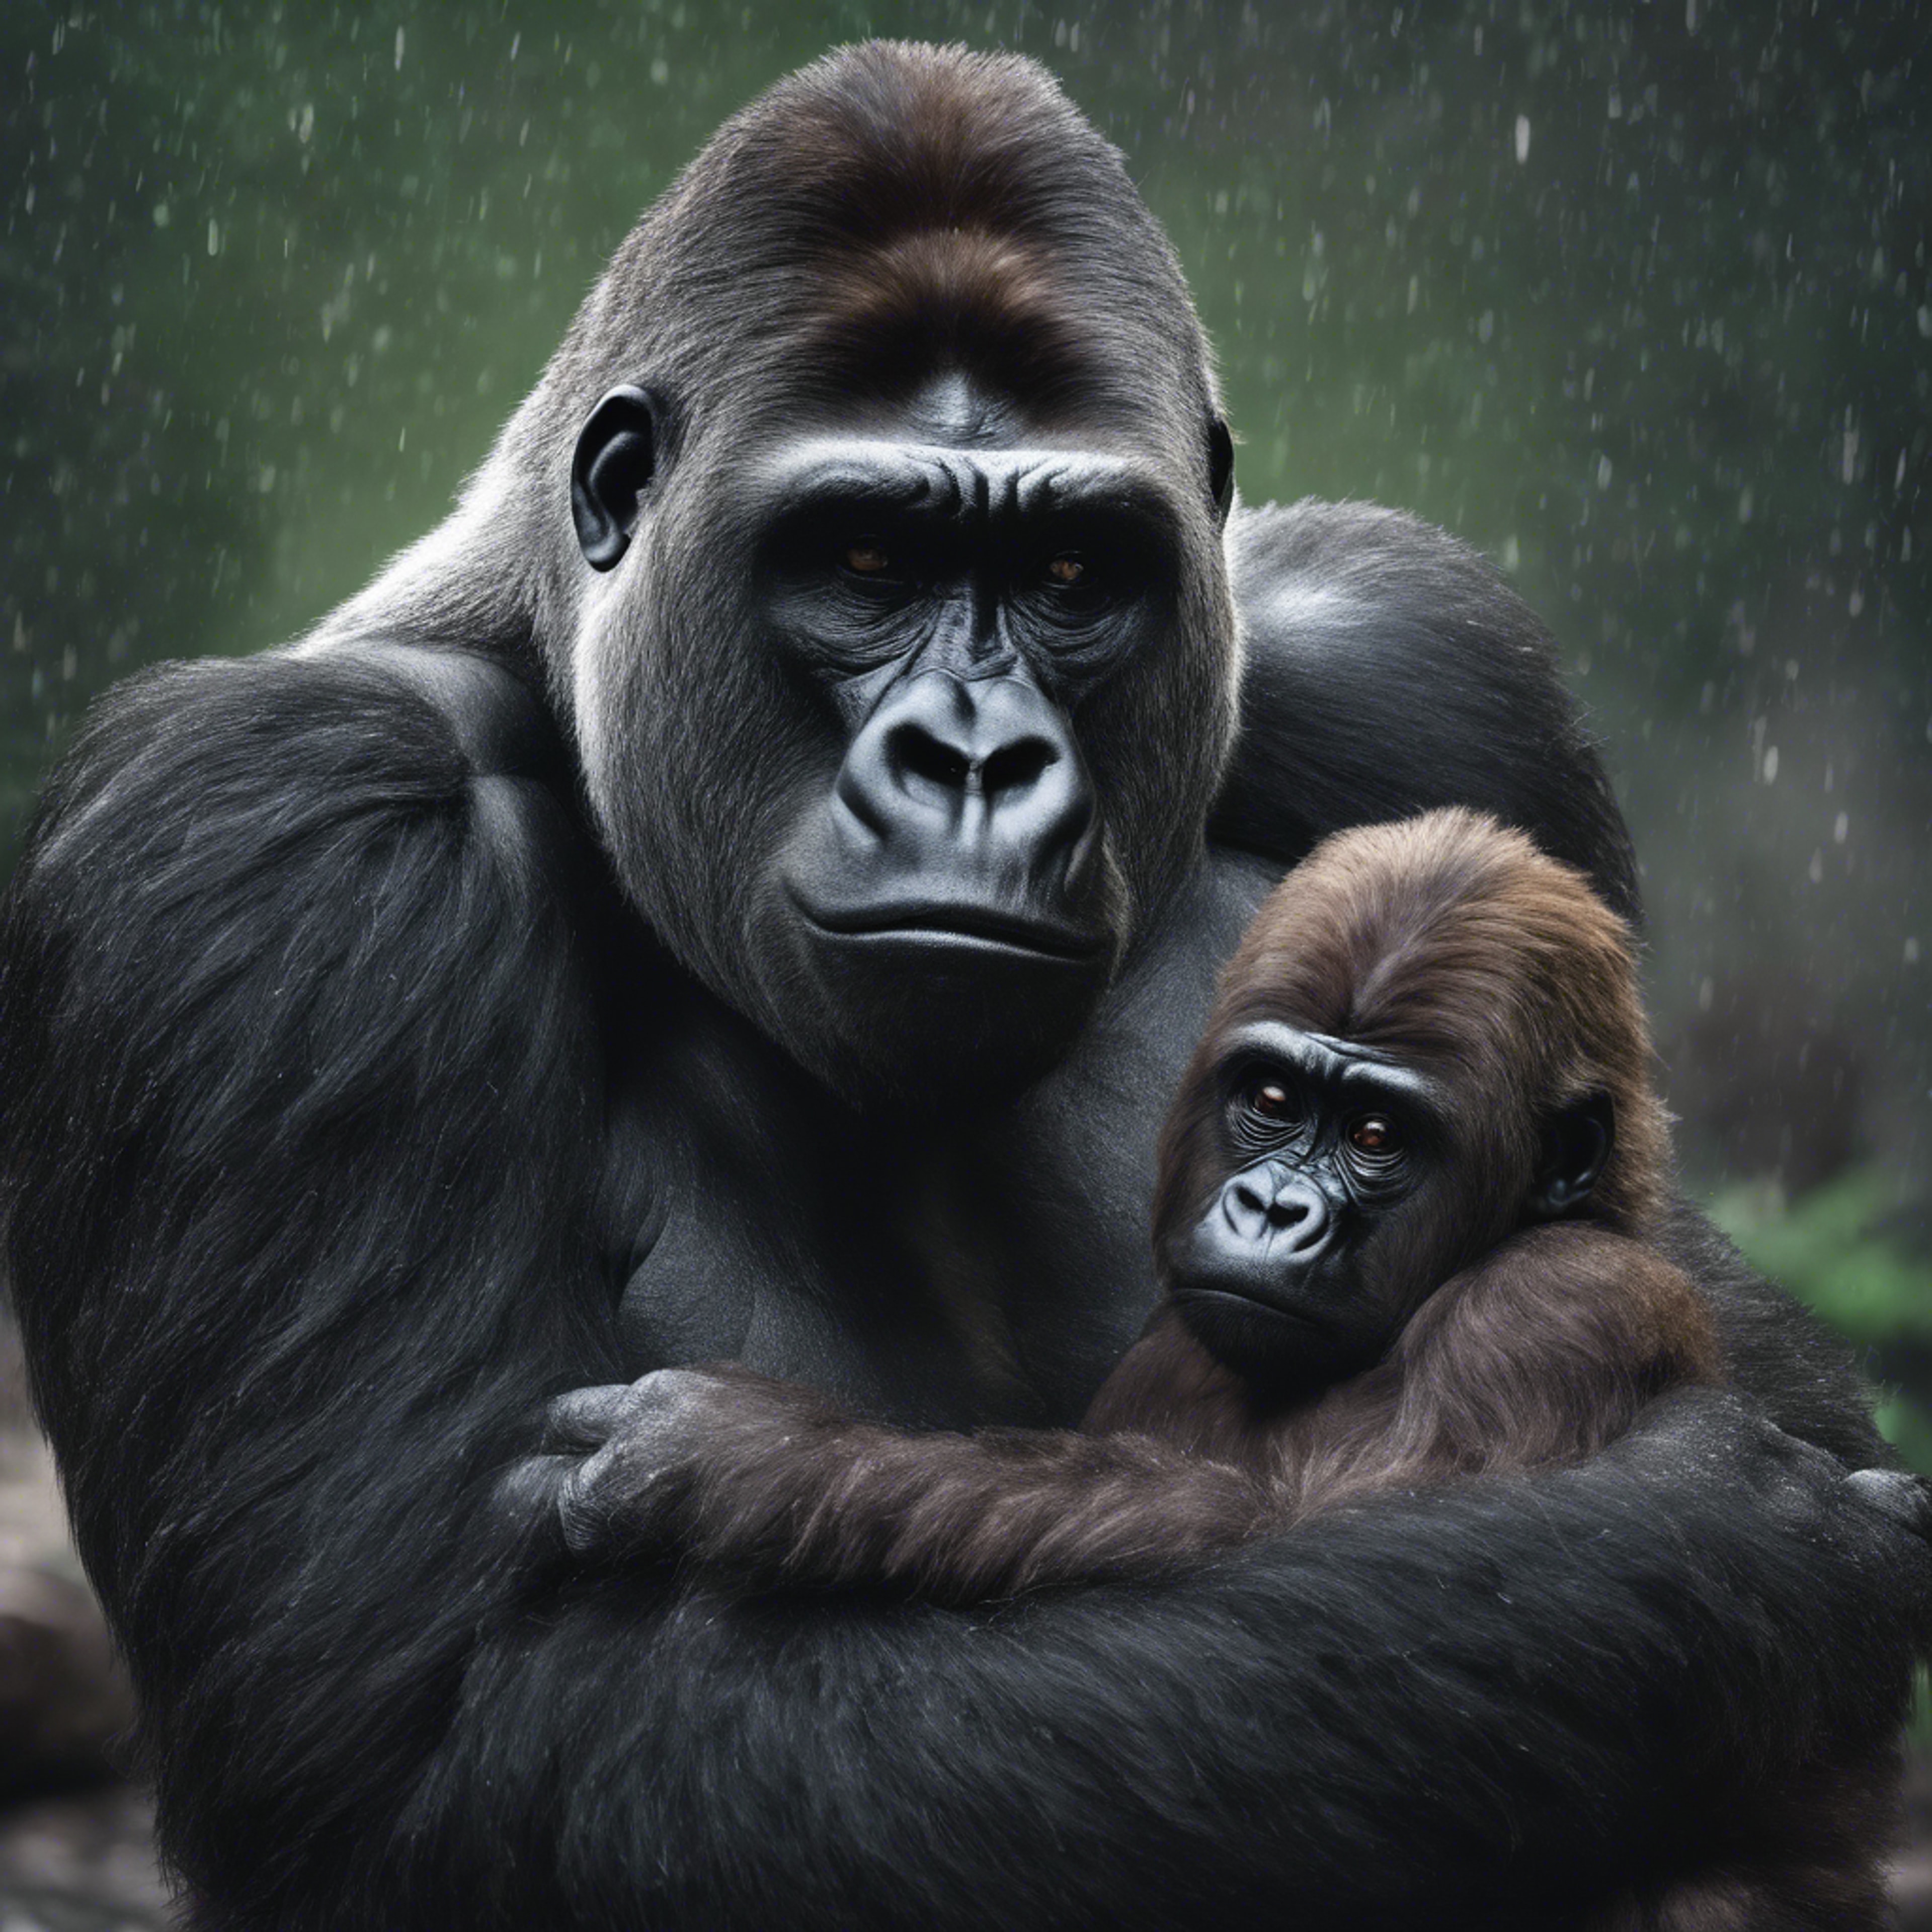 A soft, sensitive study of a gorilla father gently comforting his scared offspring during a thunderstorm. Tapeta[6d897e1fa87d4d60b202]